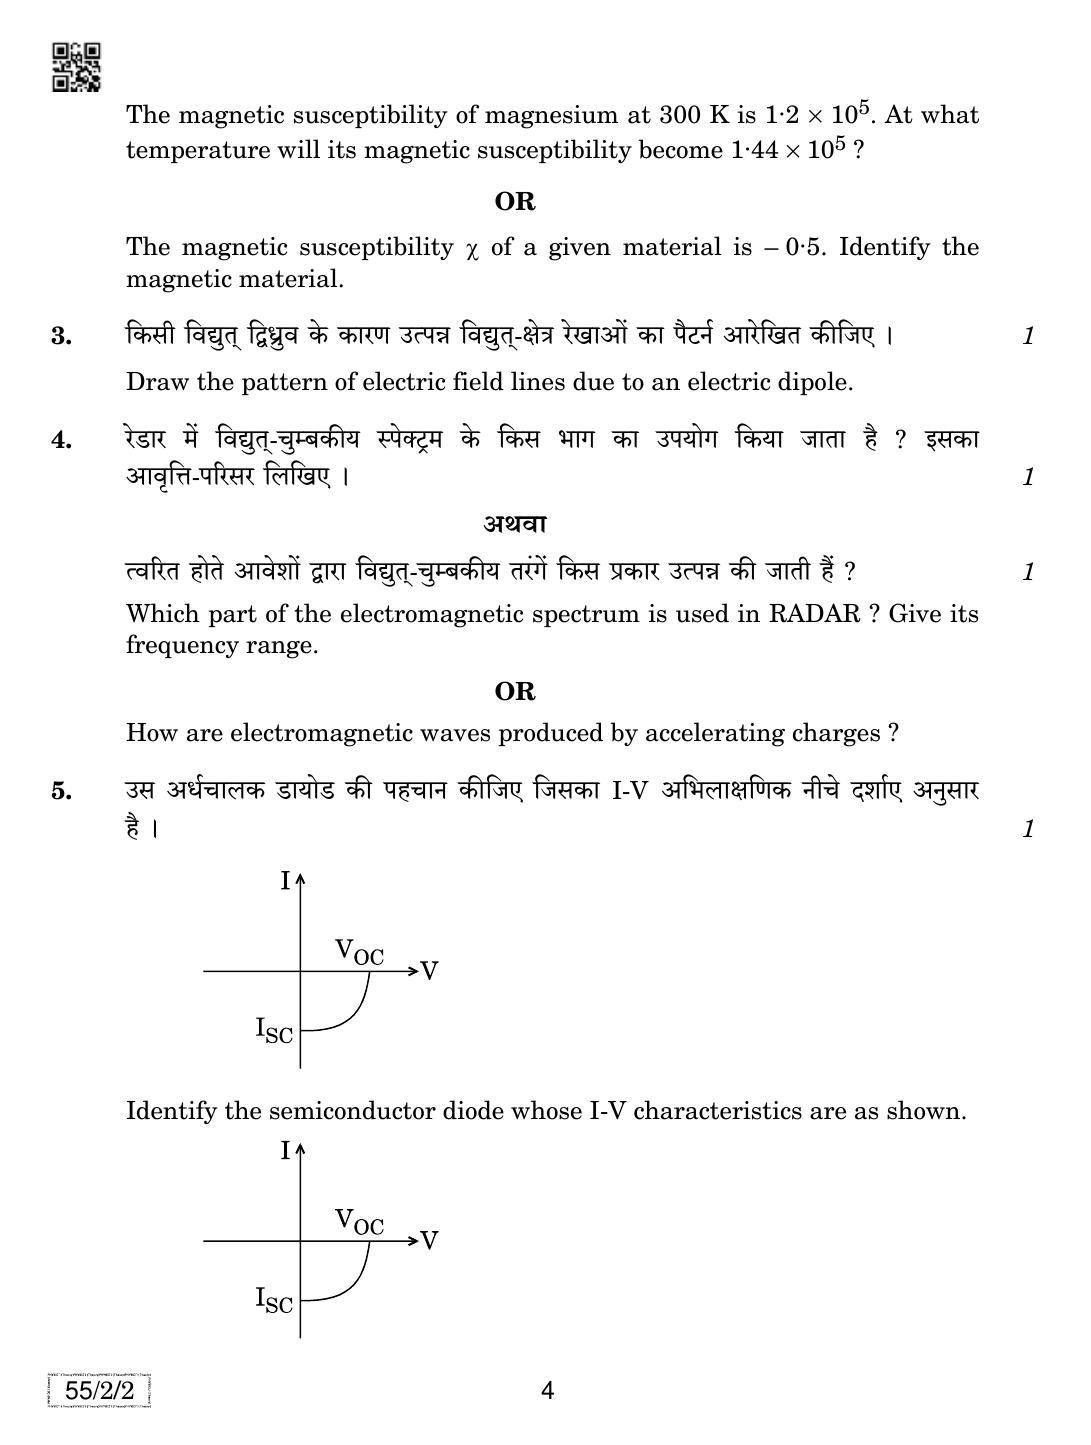 CBSE Class 12 55-2-2 Physics 2019 Question Paper - Page 4